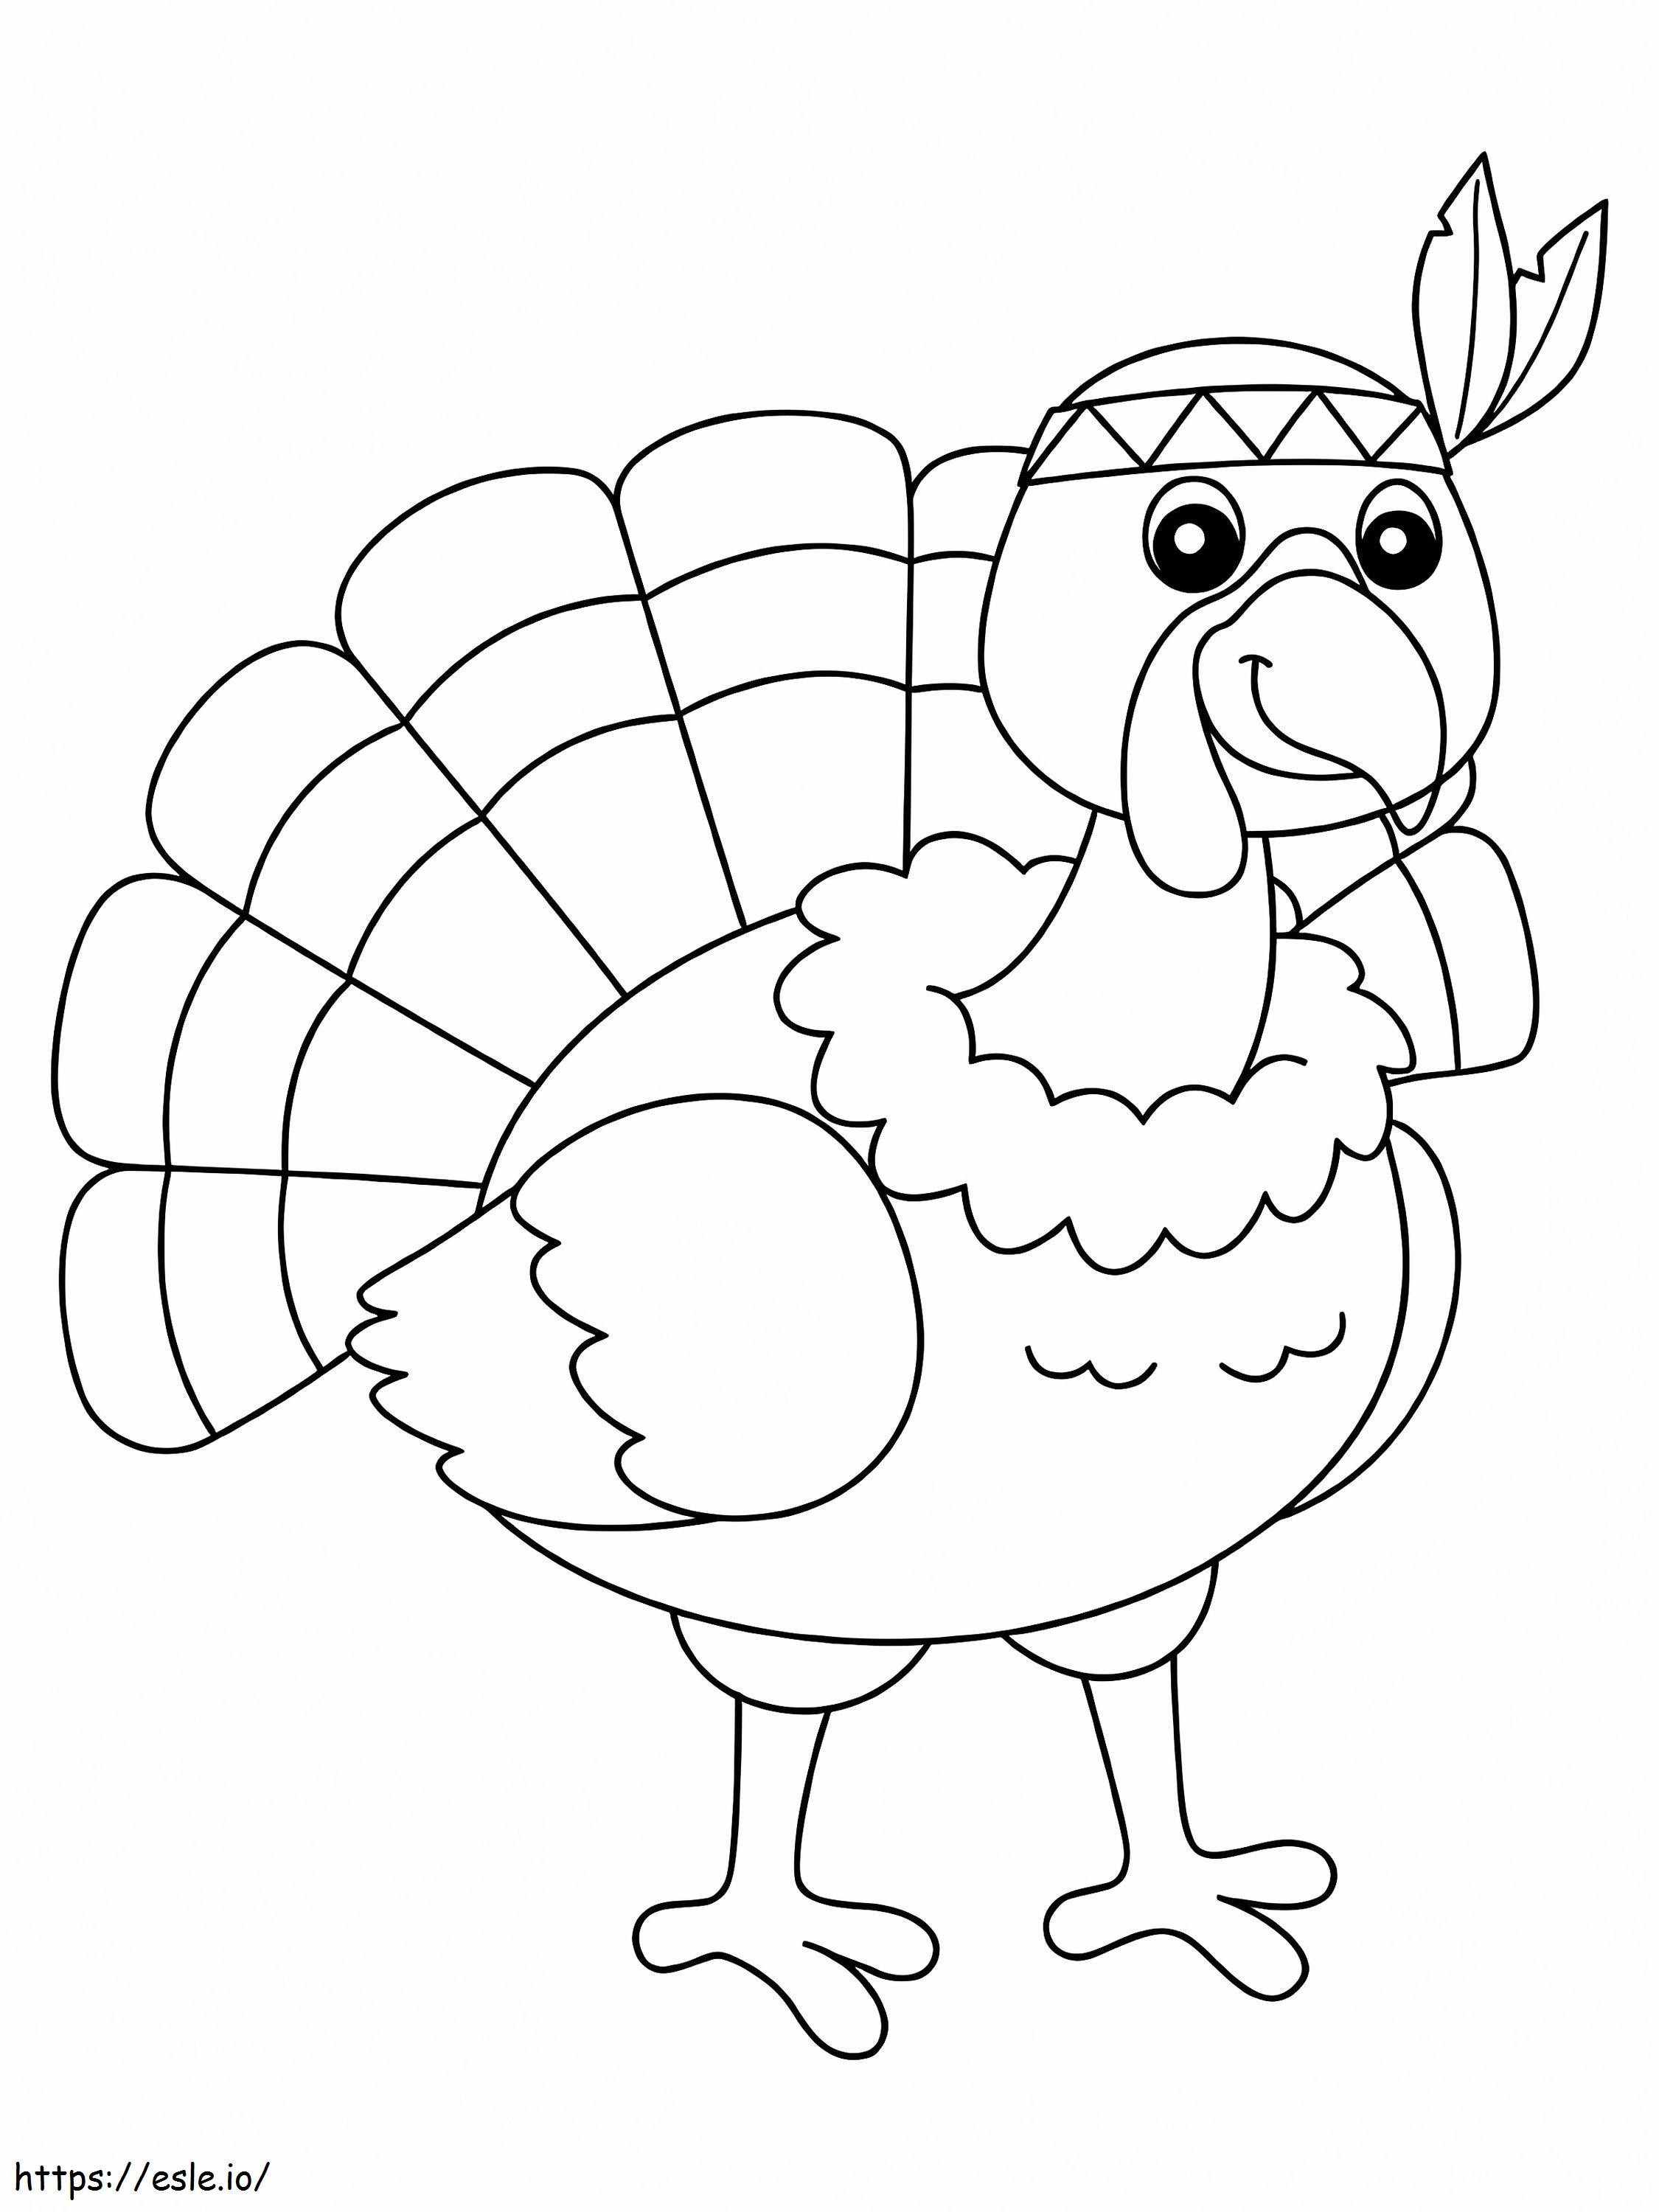 Large Thanksgiving Turkey 2 coloring page